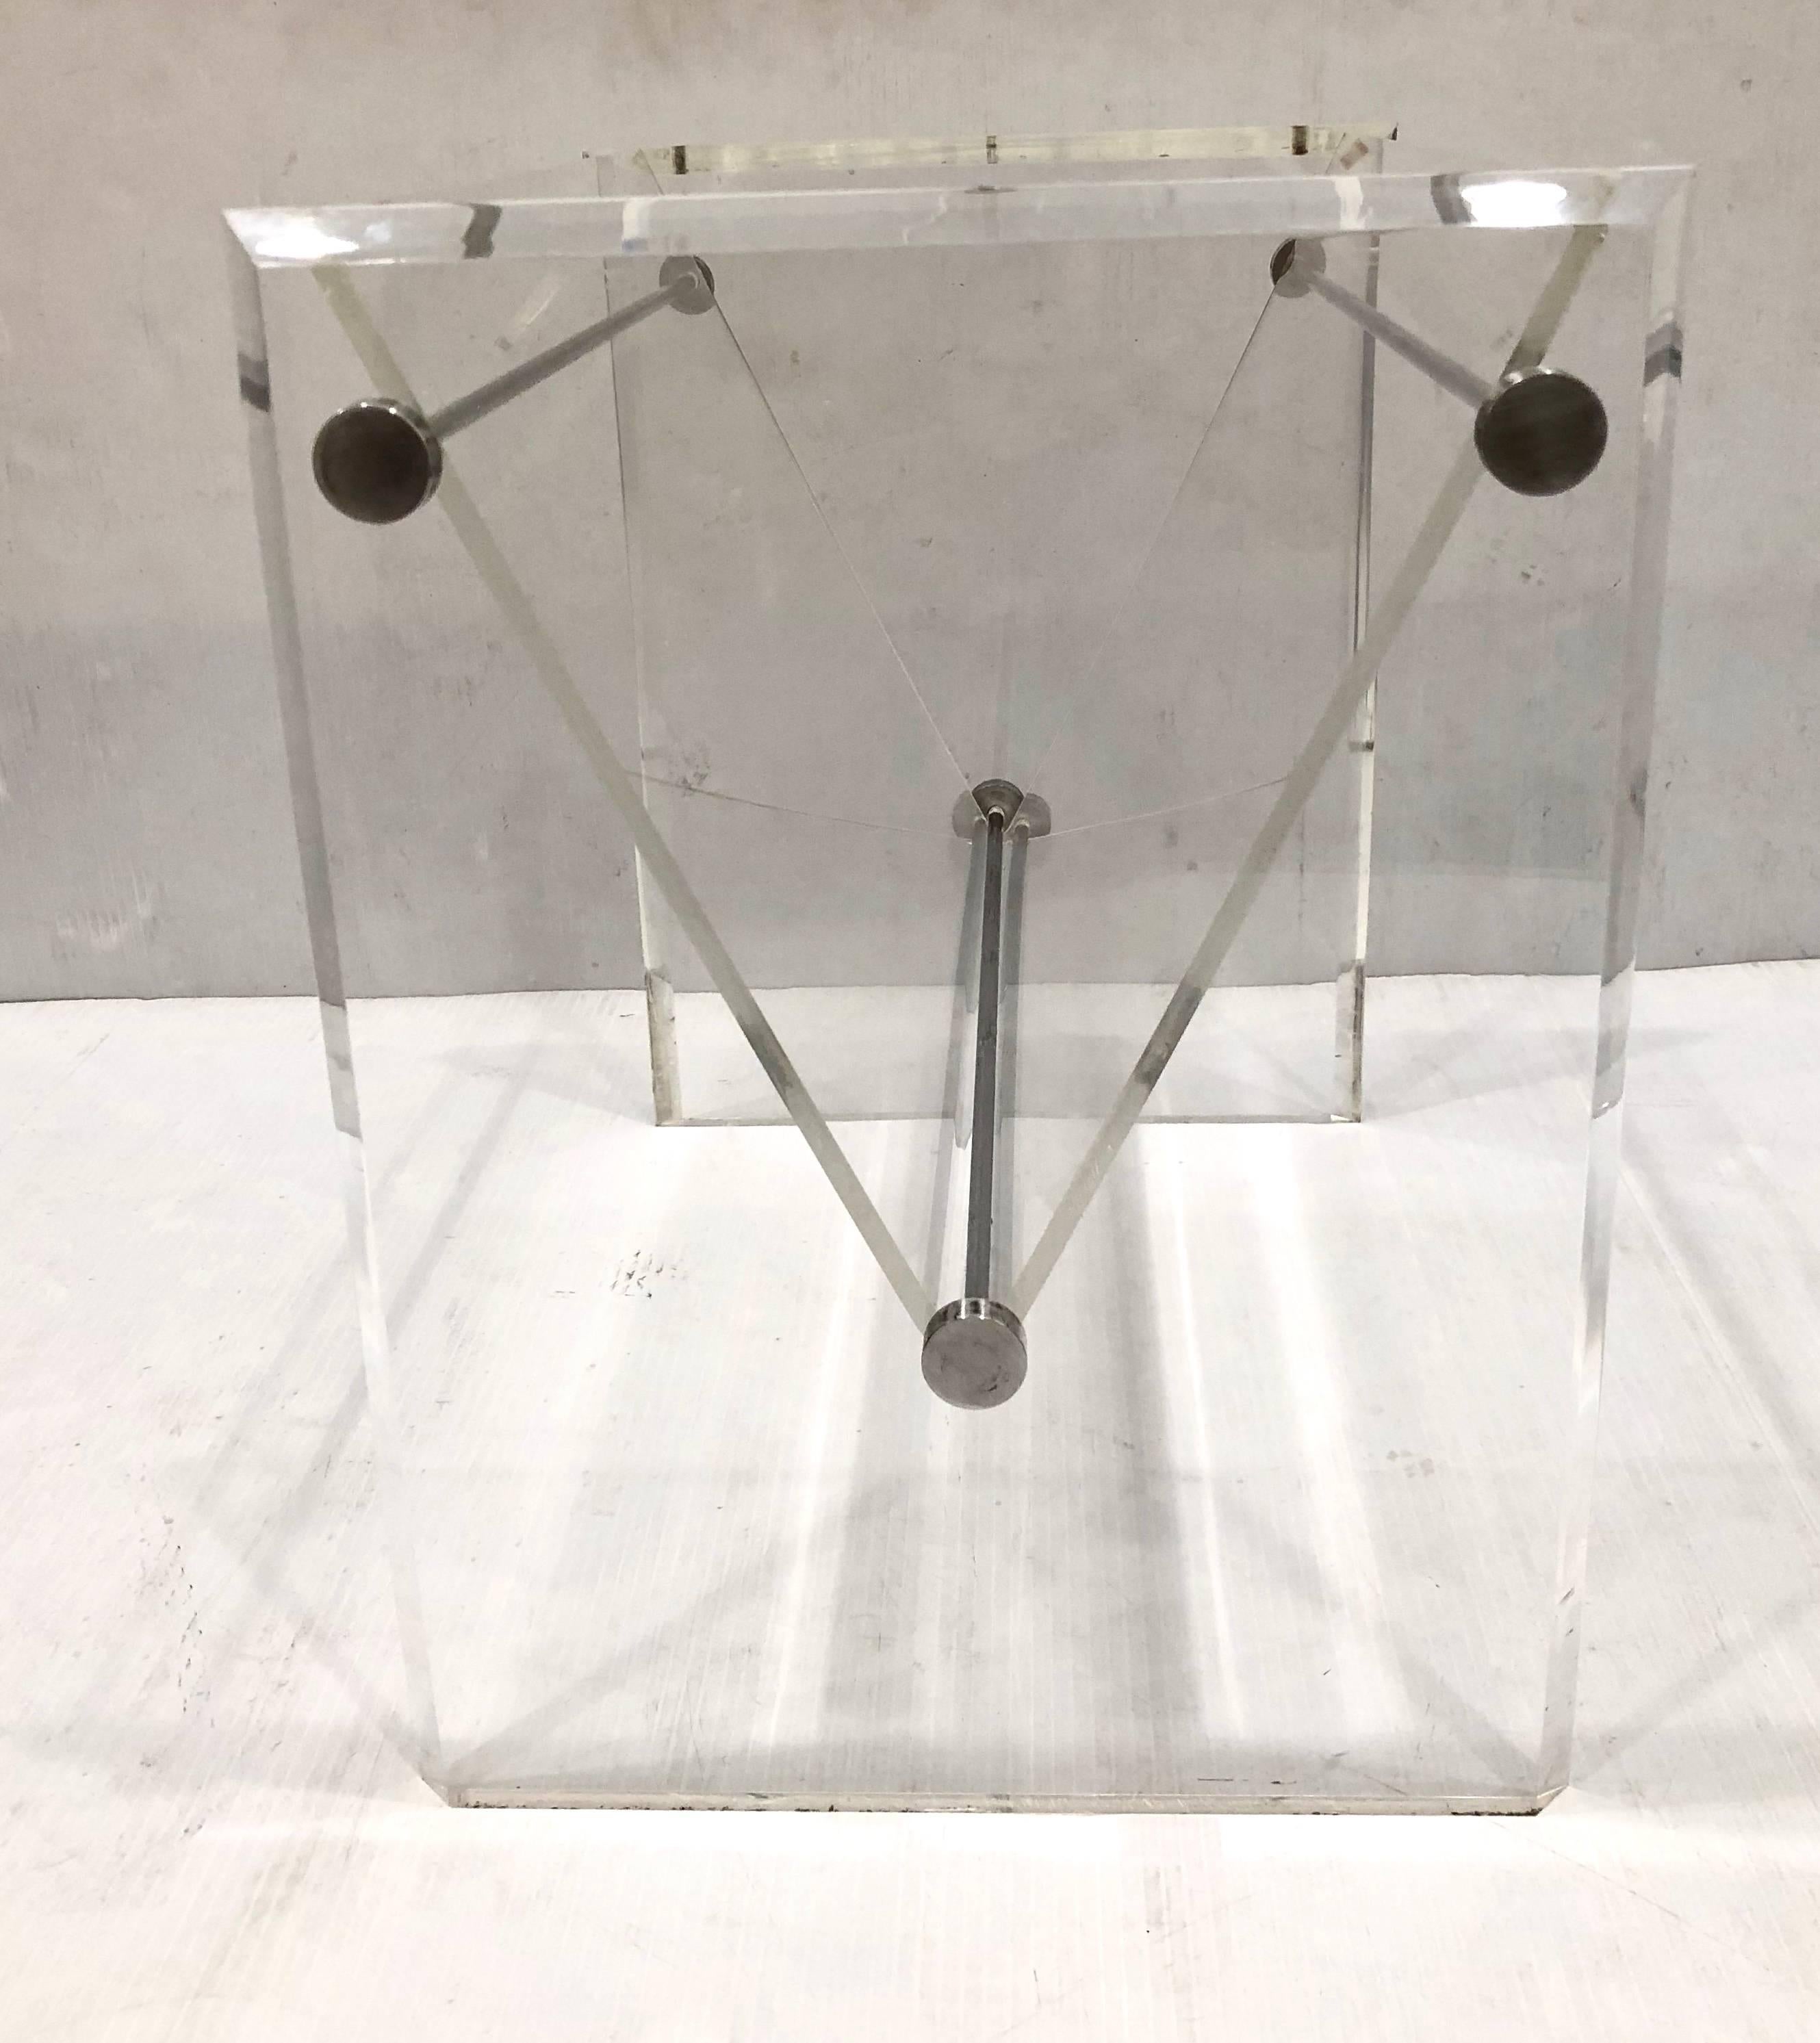 Architectural well designed Lucite magazine rack, polished Lucite walls with bevelled edge and polished chrome rods with solid polished aluminium ends, circa 1970s very nice and clean condition.